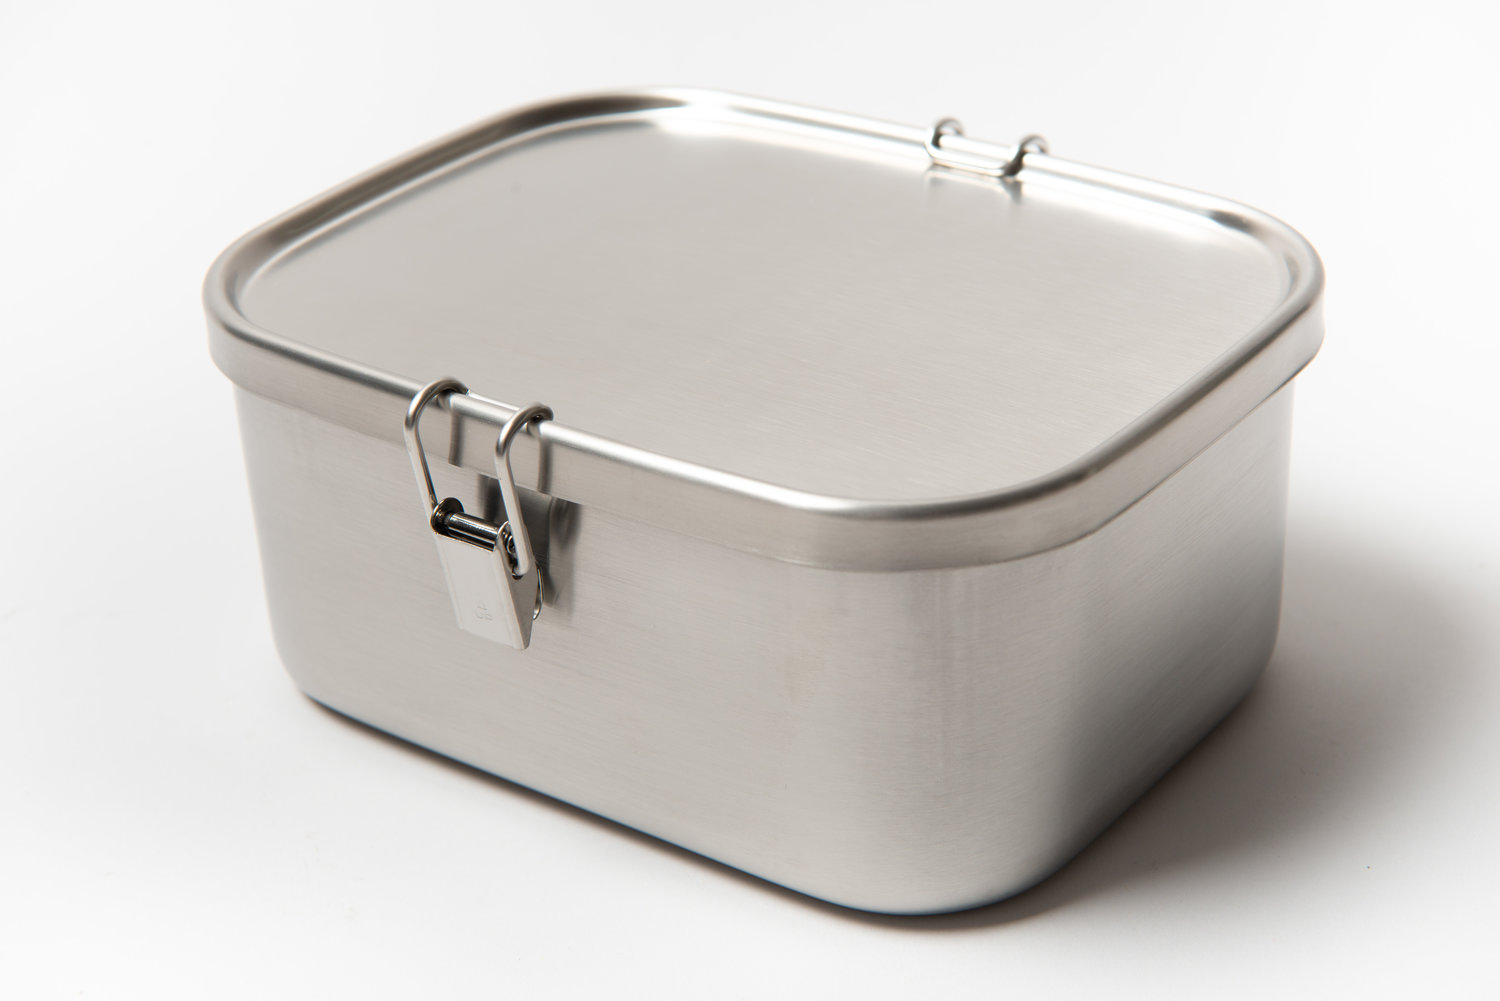  Plain Metal Lunch Box and Bottle: Home & Kitchen